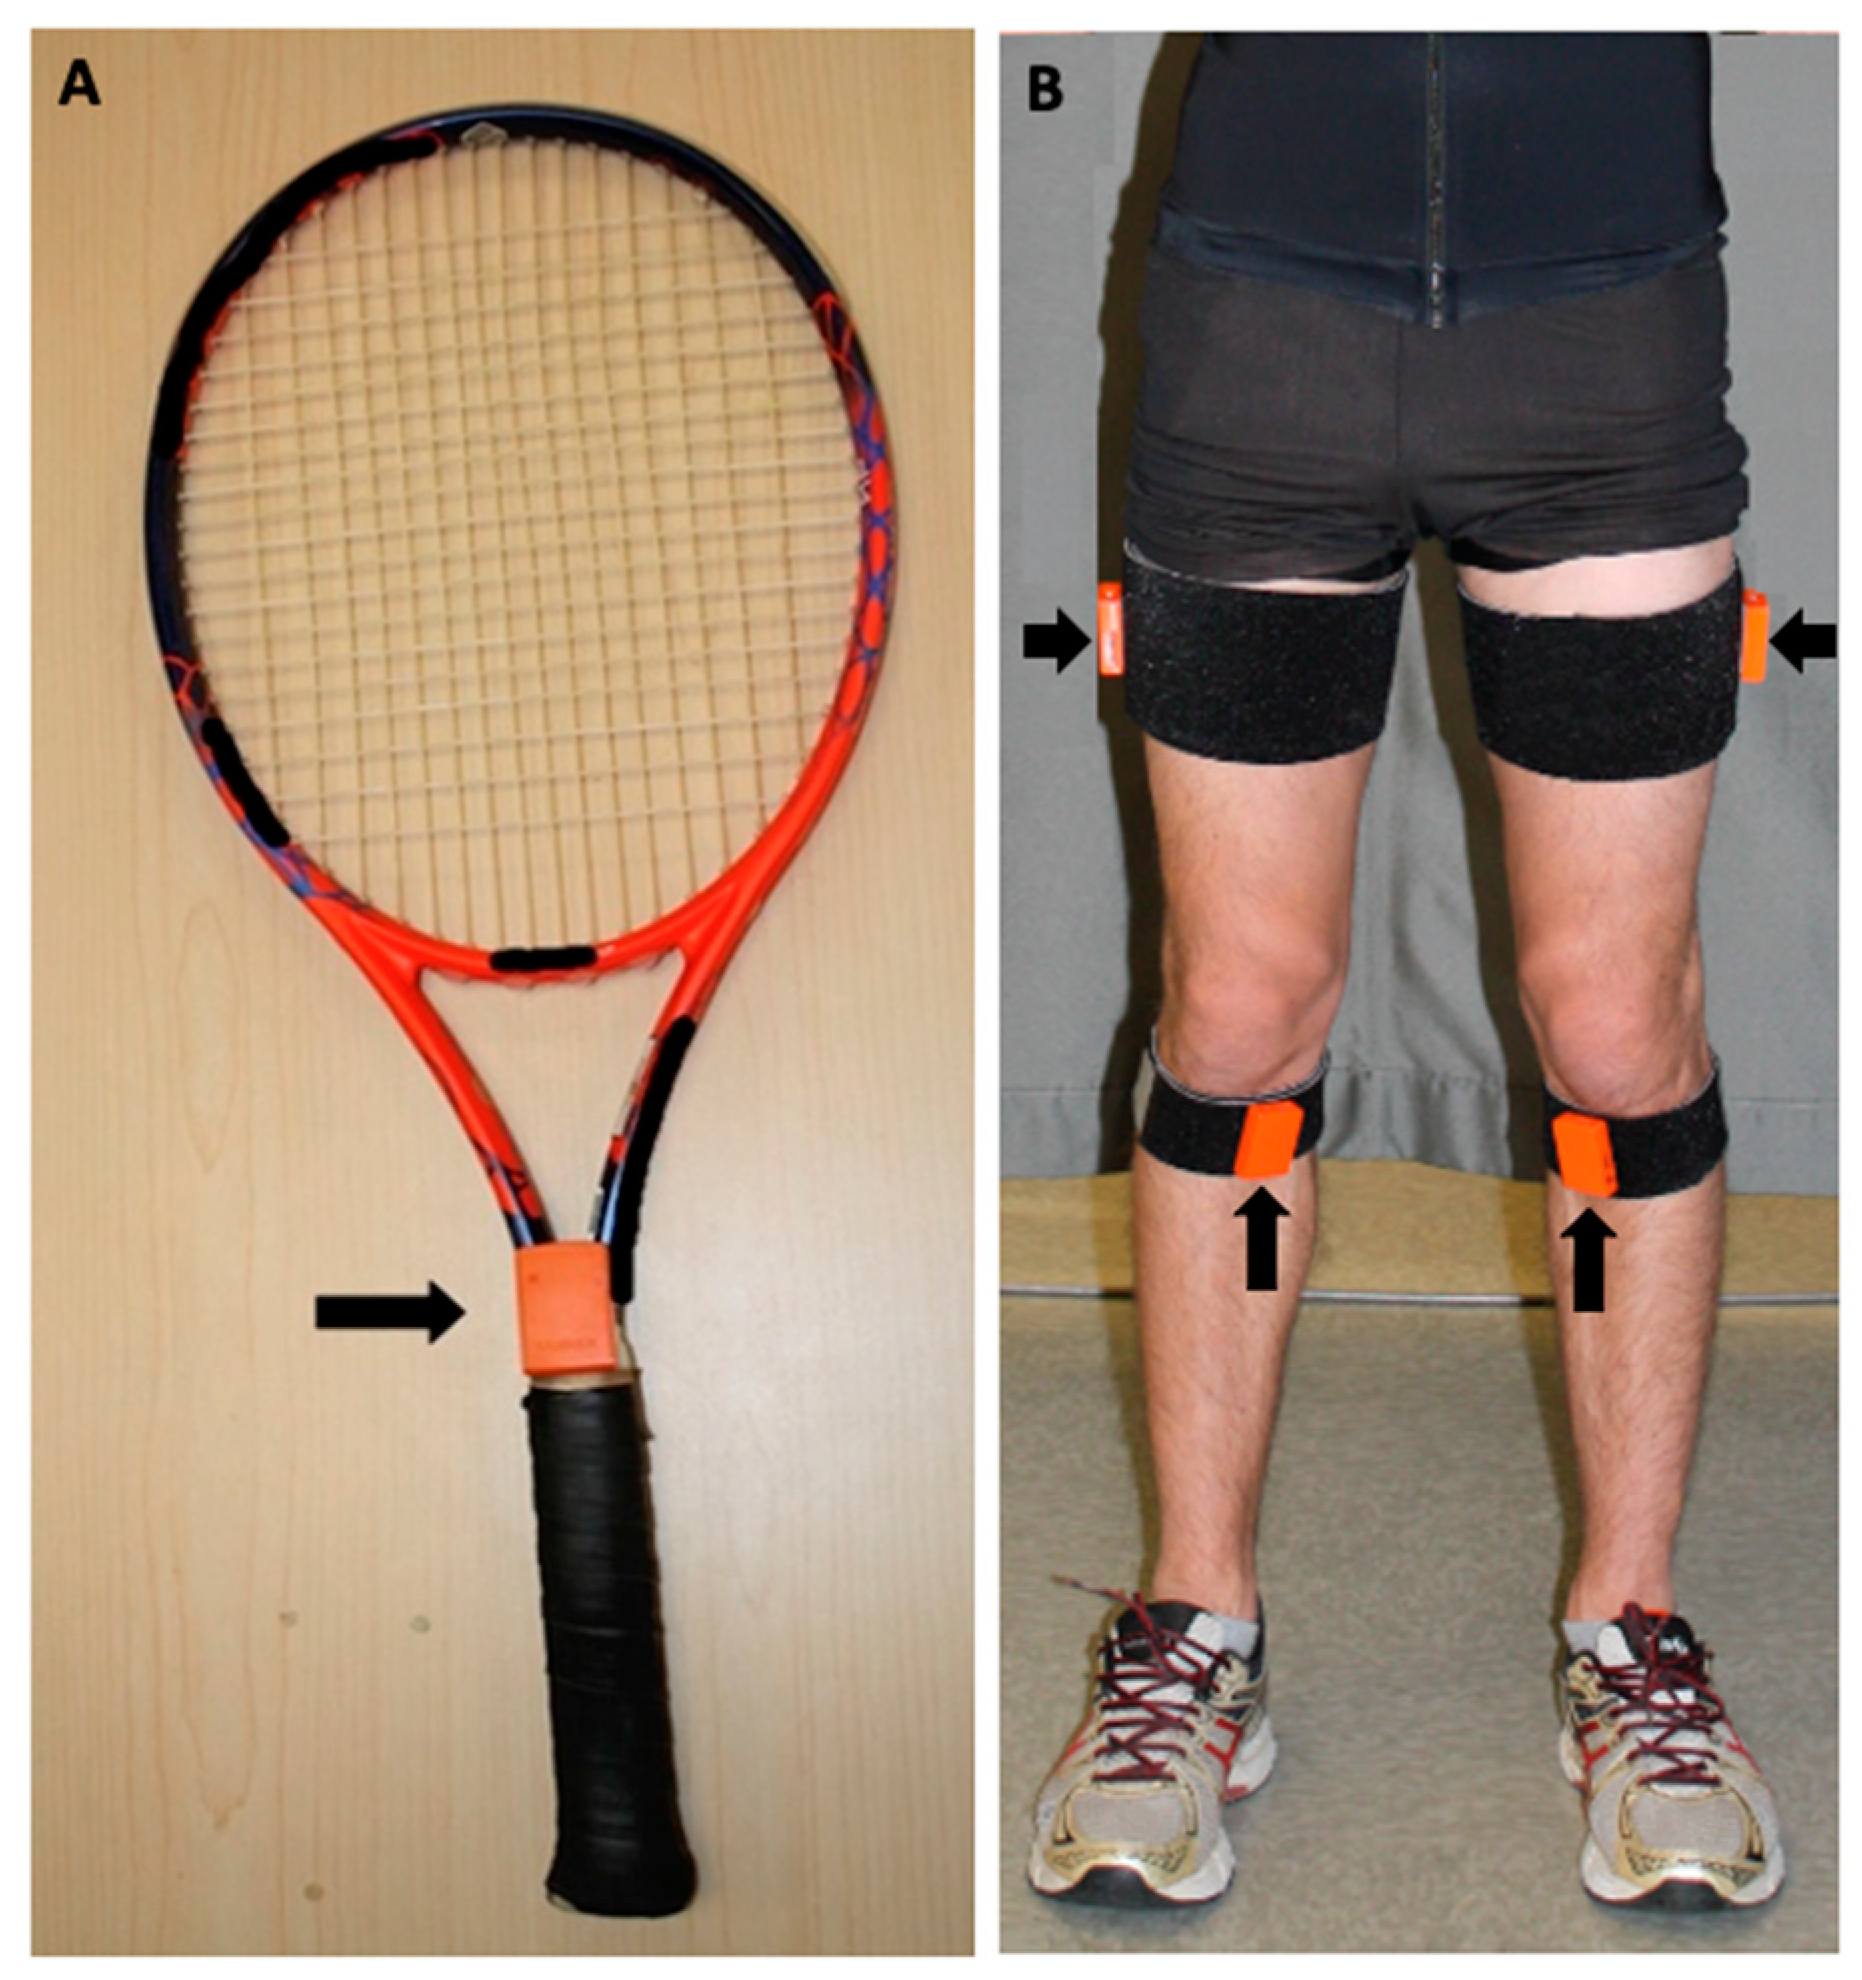 Sensors | Free Full-Text | The Effects of Knee Flexion on Tennis Serve  Performance of Intermediate Level Tennis Players